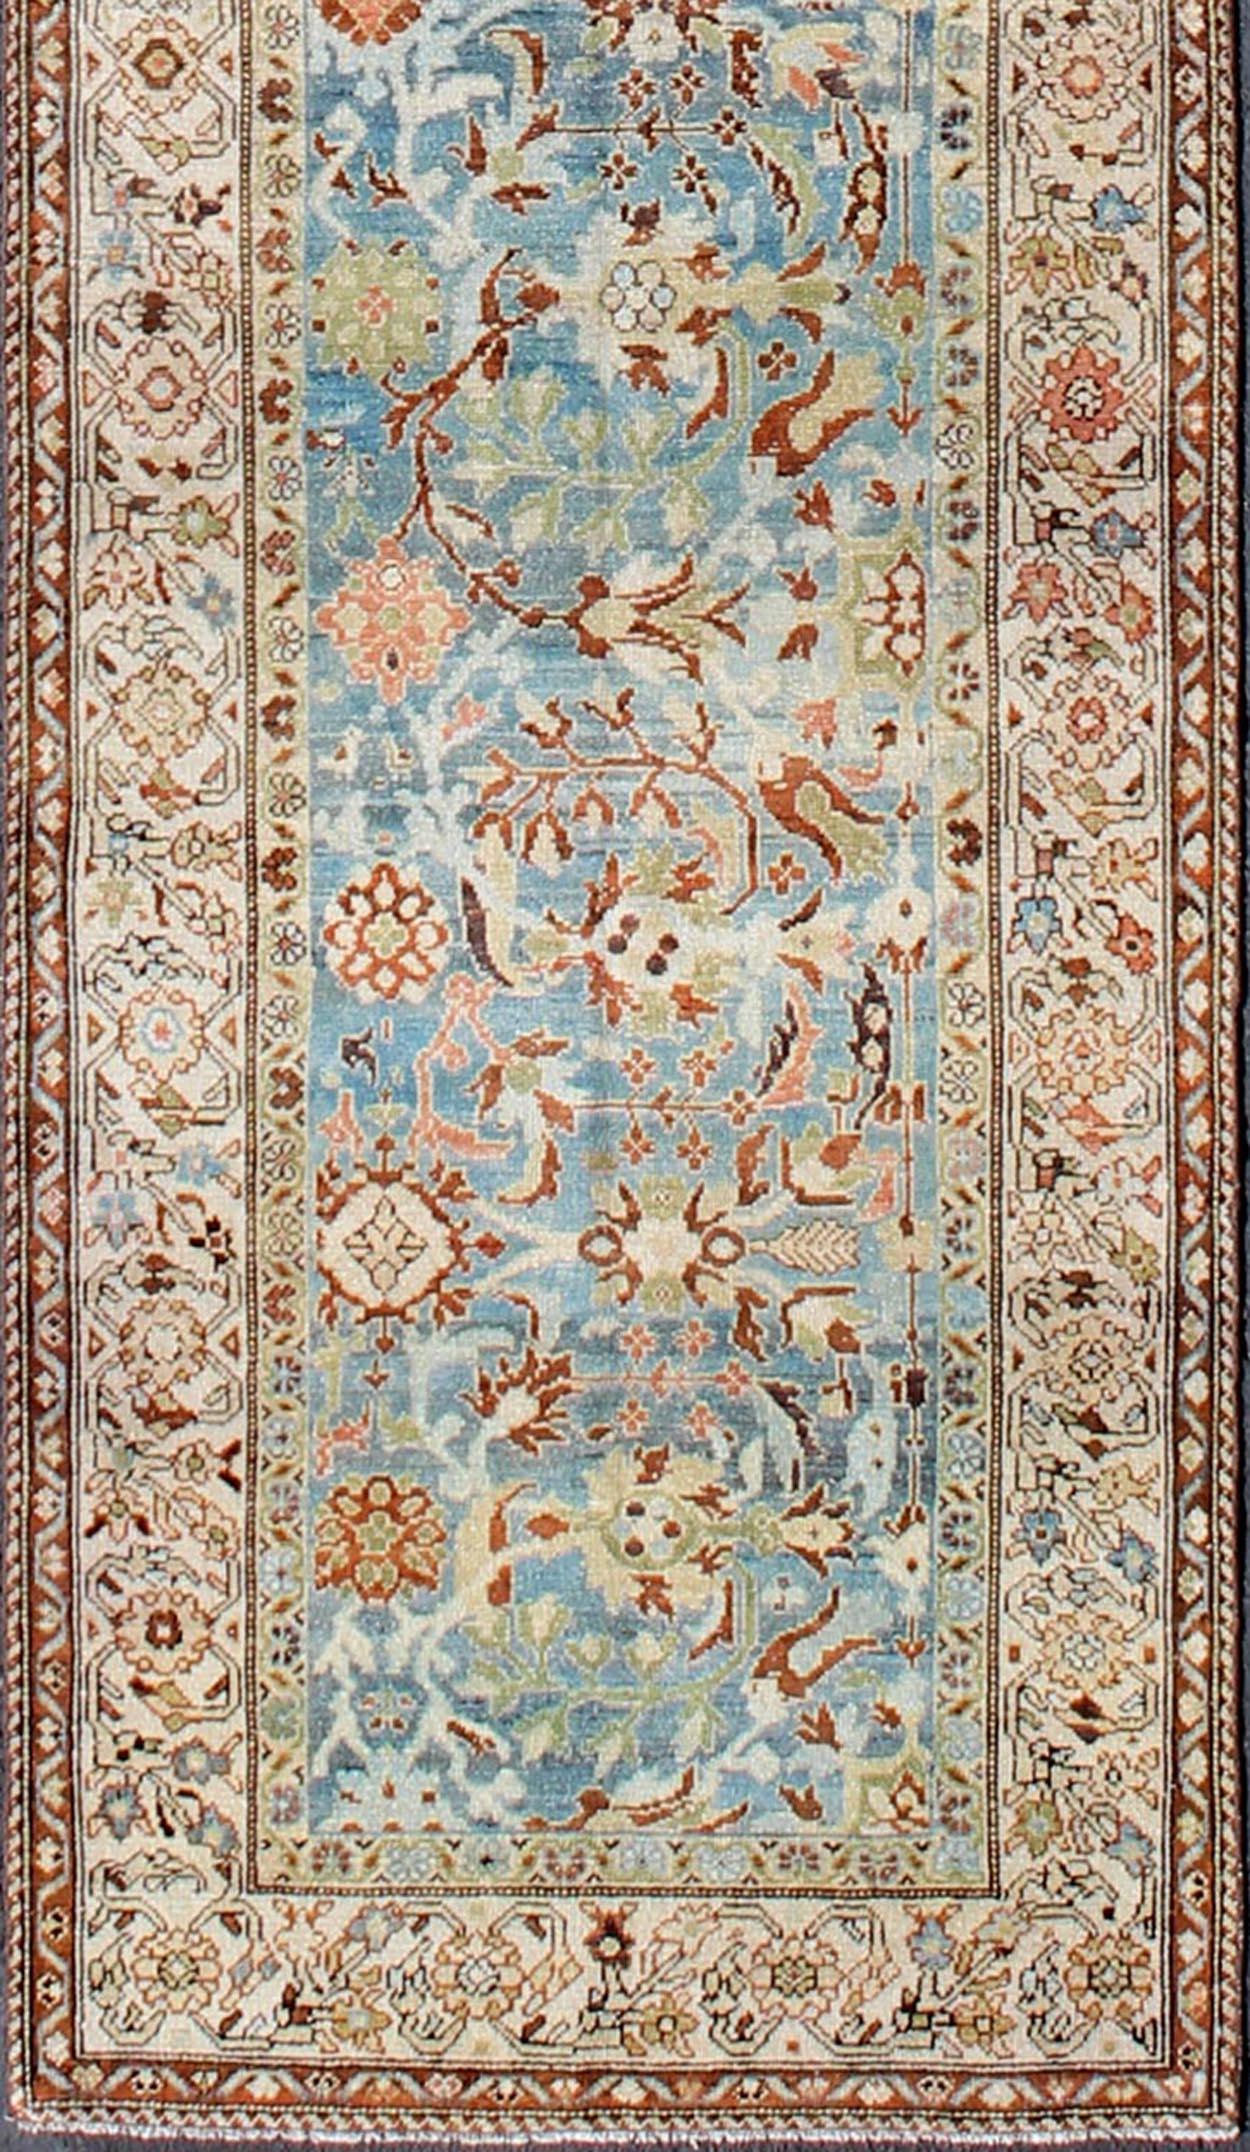 Malayer Persian antique Runner with all-over floral design in multi-colors, Keivan Woven Arts/rug ema-7530, country of origin / type: Iran / Malayer, circa 1900

This antique Persian Malayer runner, circa early 20th century, relies heavily on